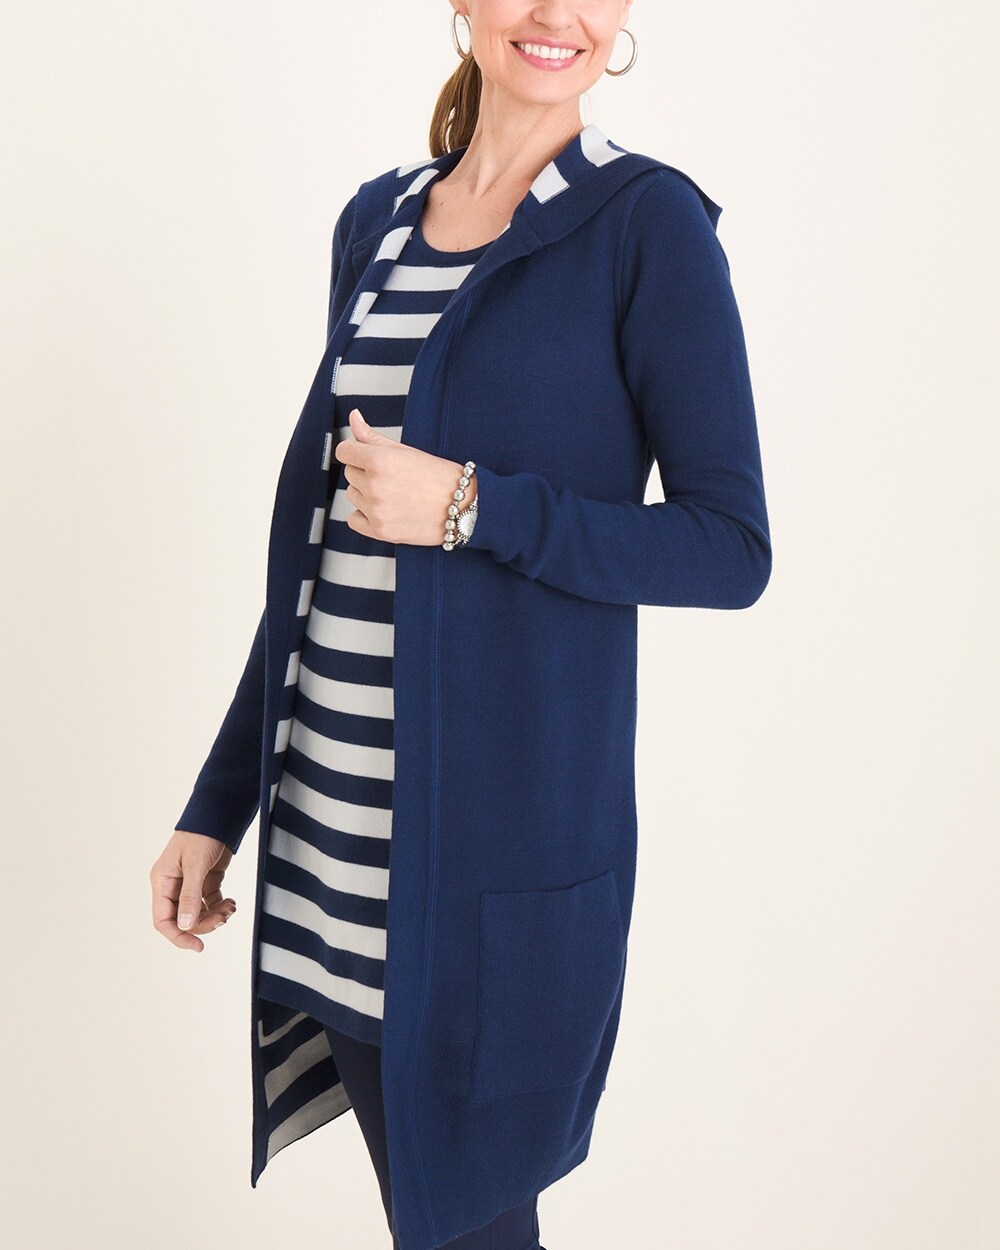 Zenergy Reversible Navy Striped to Solid Cardigan